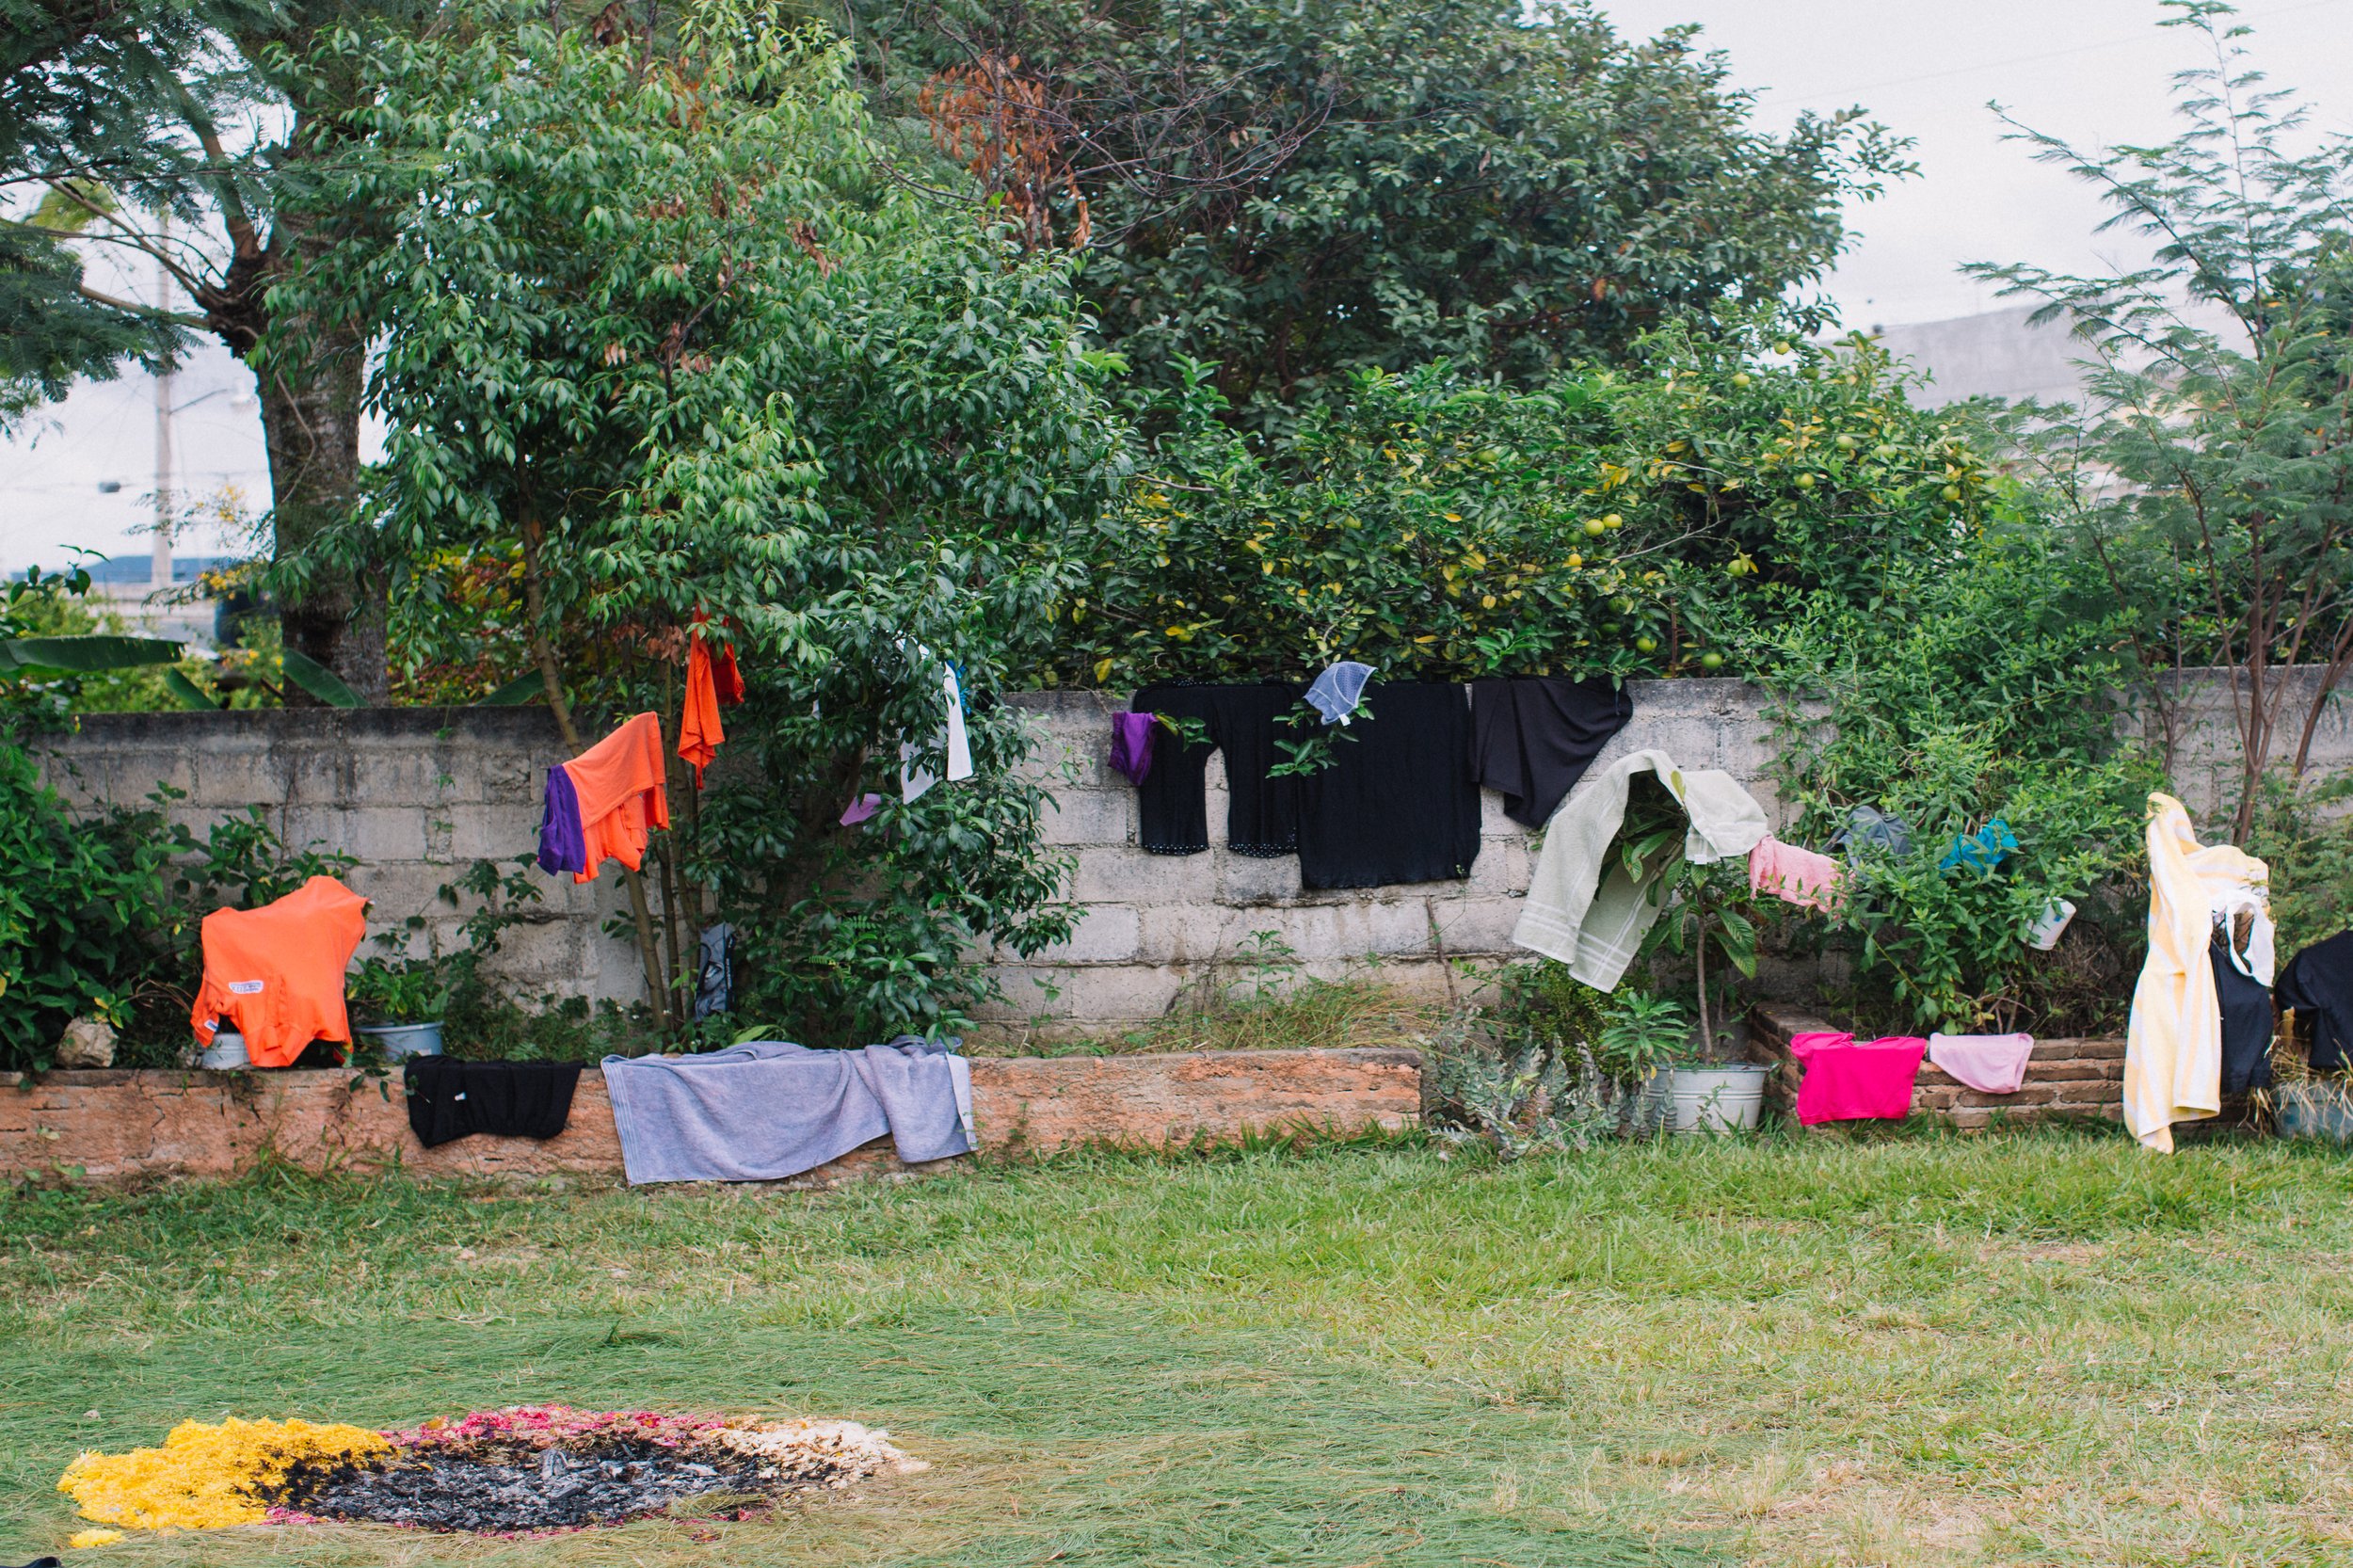  The mothers of the caravan wash and hang their clothes to dry during a rest stop on their journey. With limited space and resources, they must travel light. 